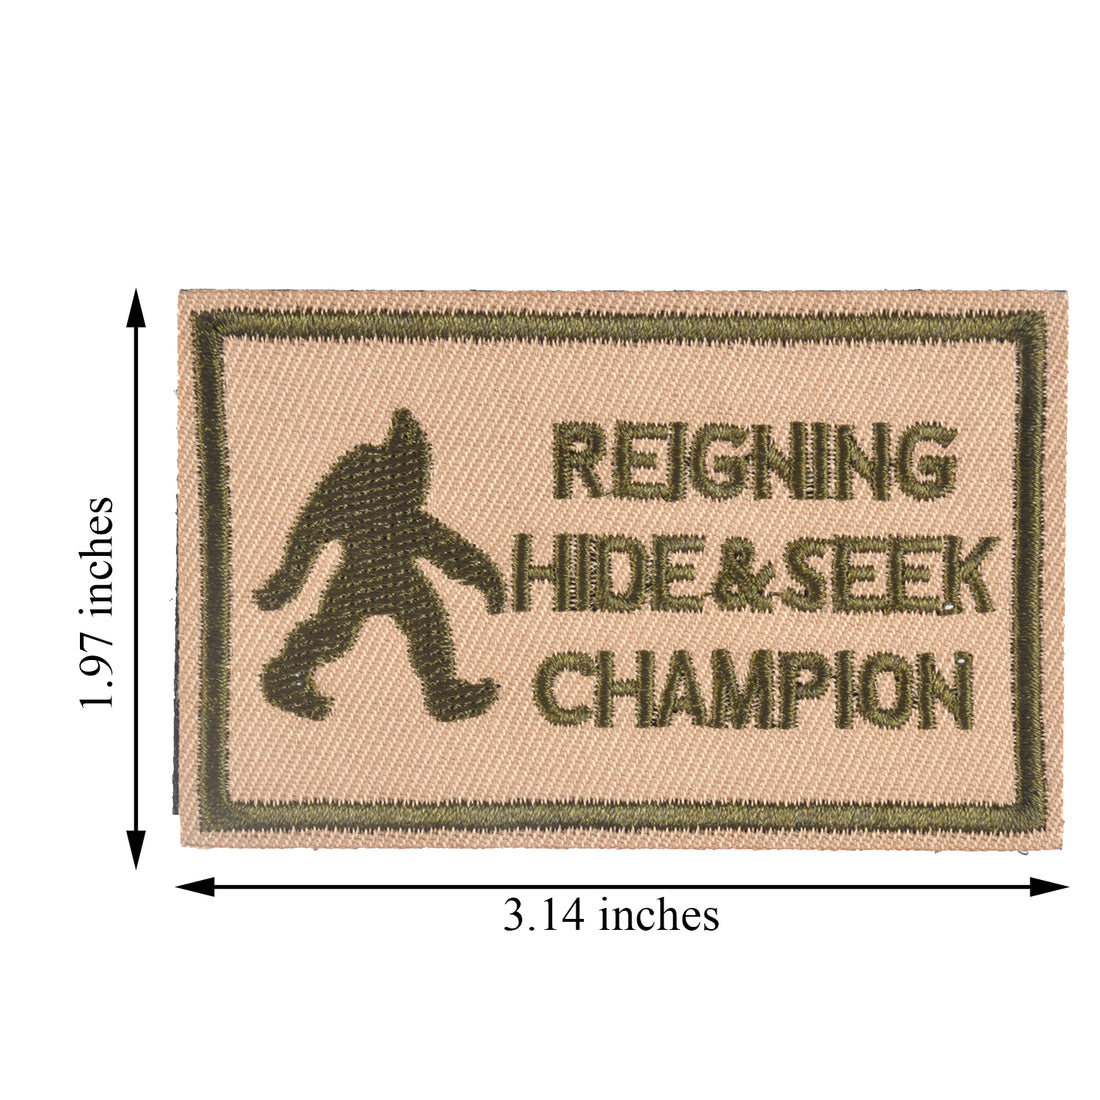 REIGNING HIDE & SEEK CHAMPION Patch, Coyote